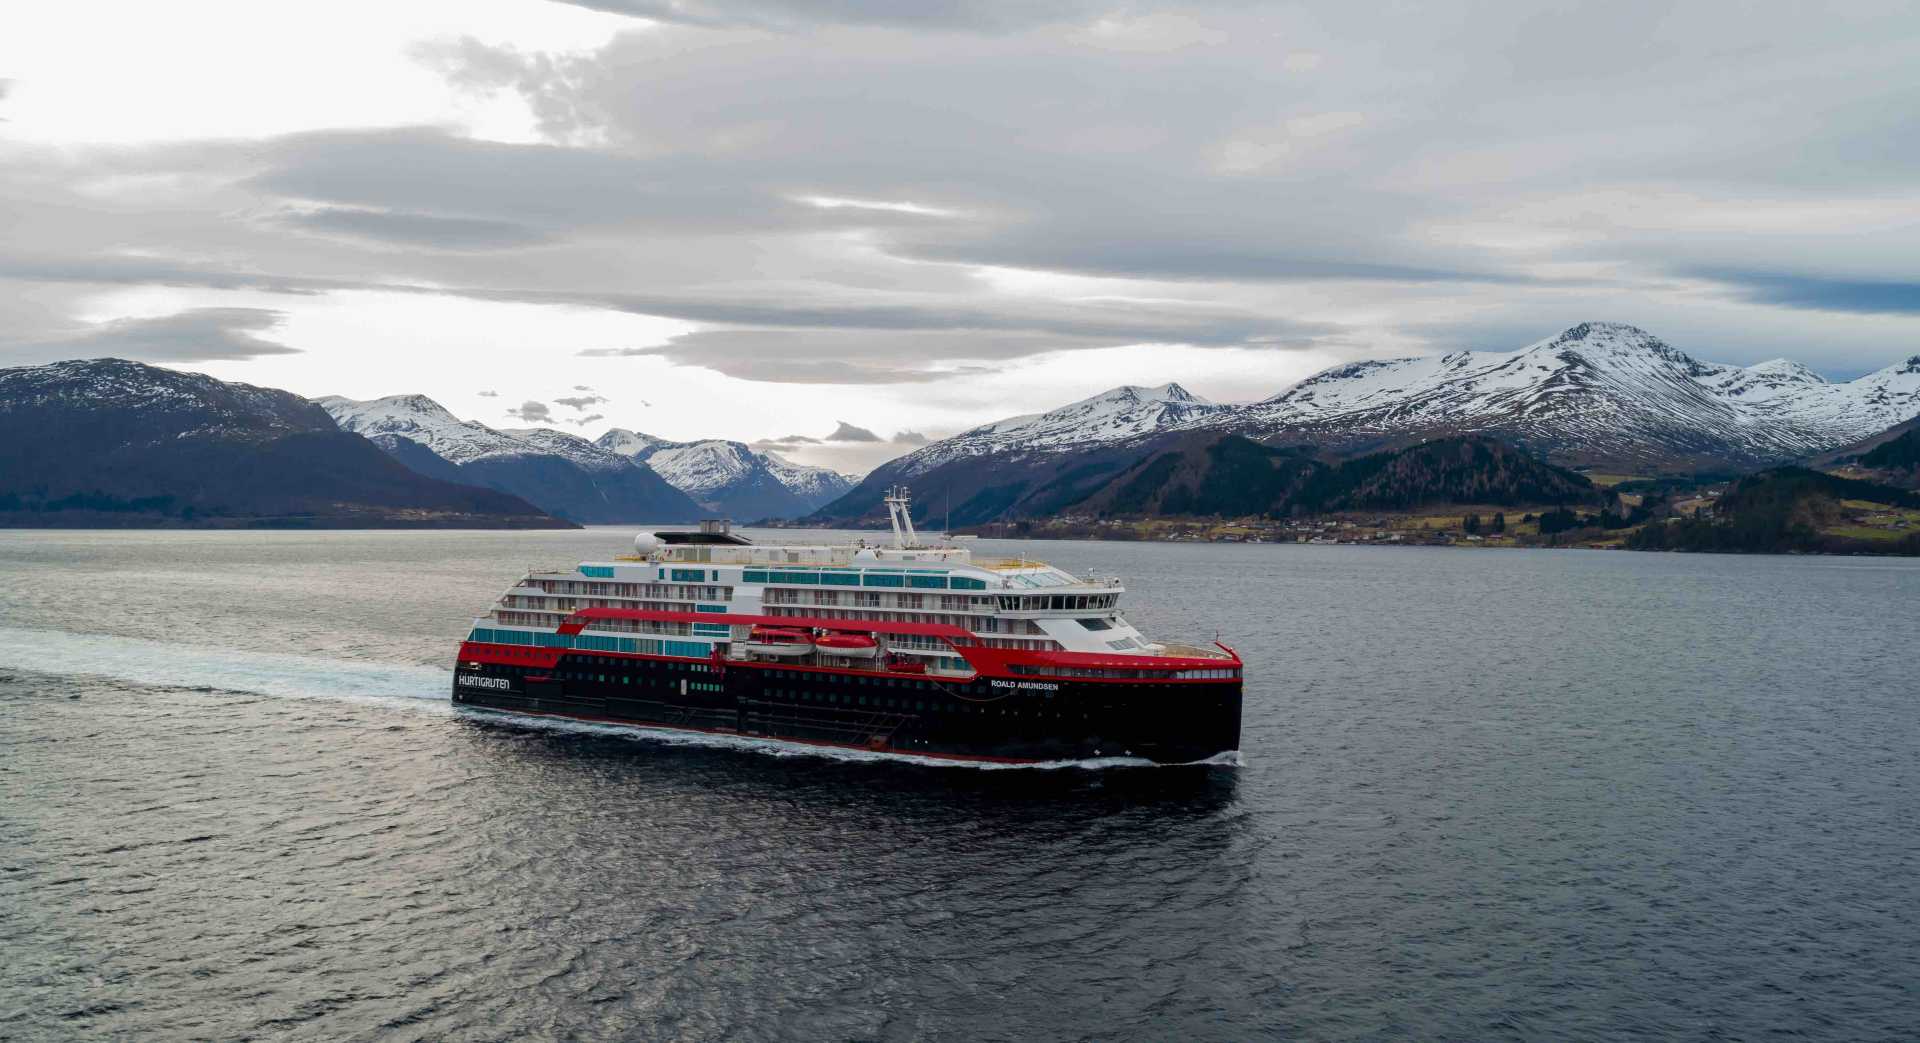 Reporting Q1 Loss Hurtigruten Sees Strong Demand For 2022 And Beyond Seatrade Cruise Com [ 1043 x 1920 Pixel ]